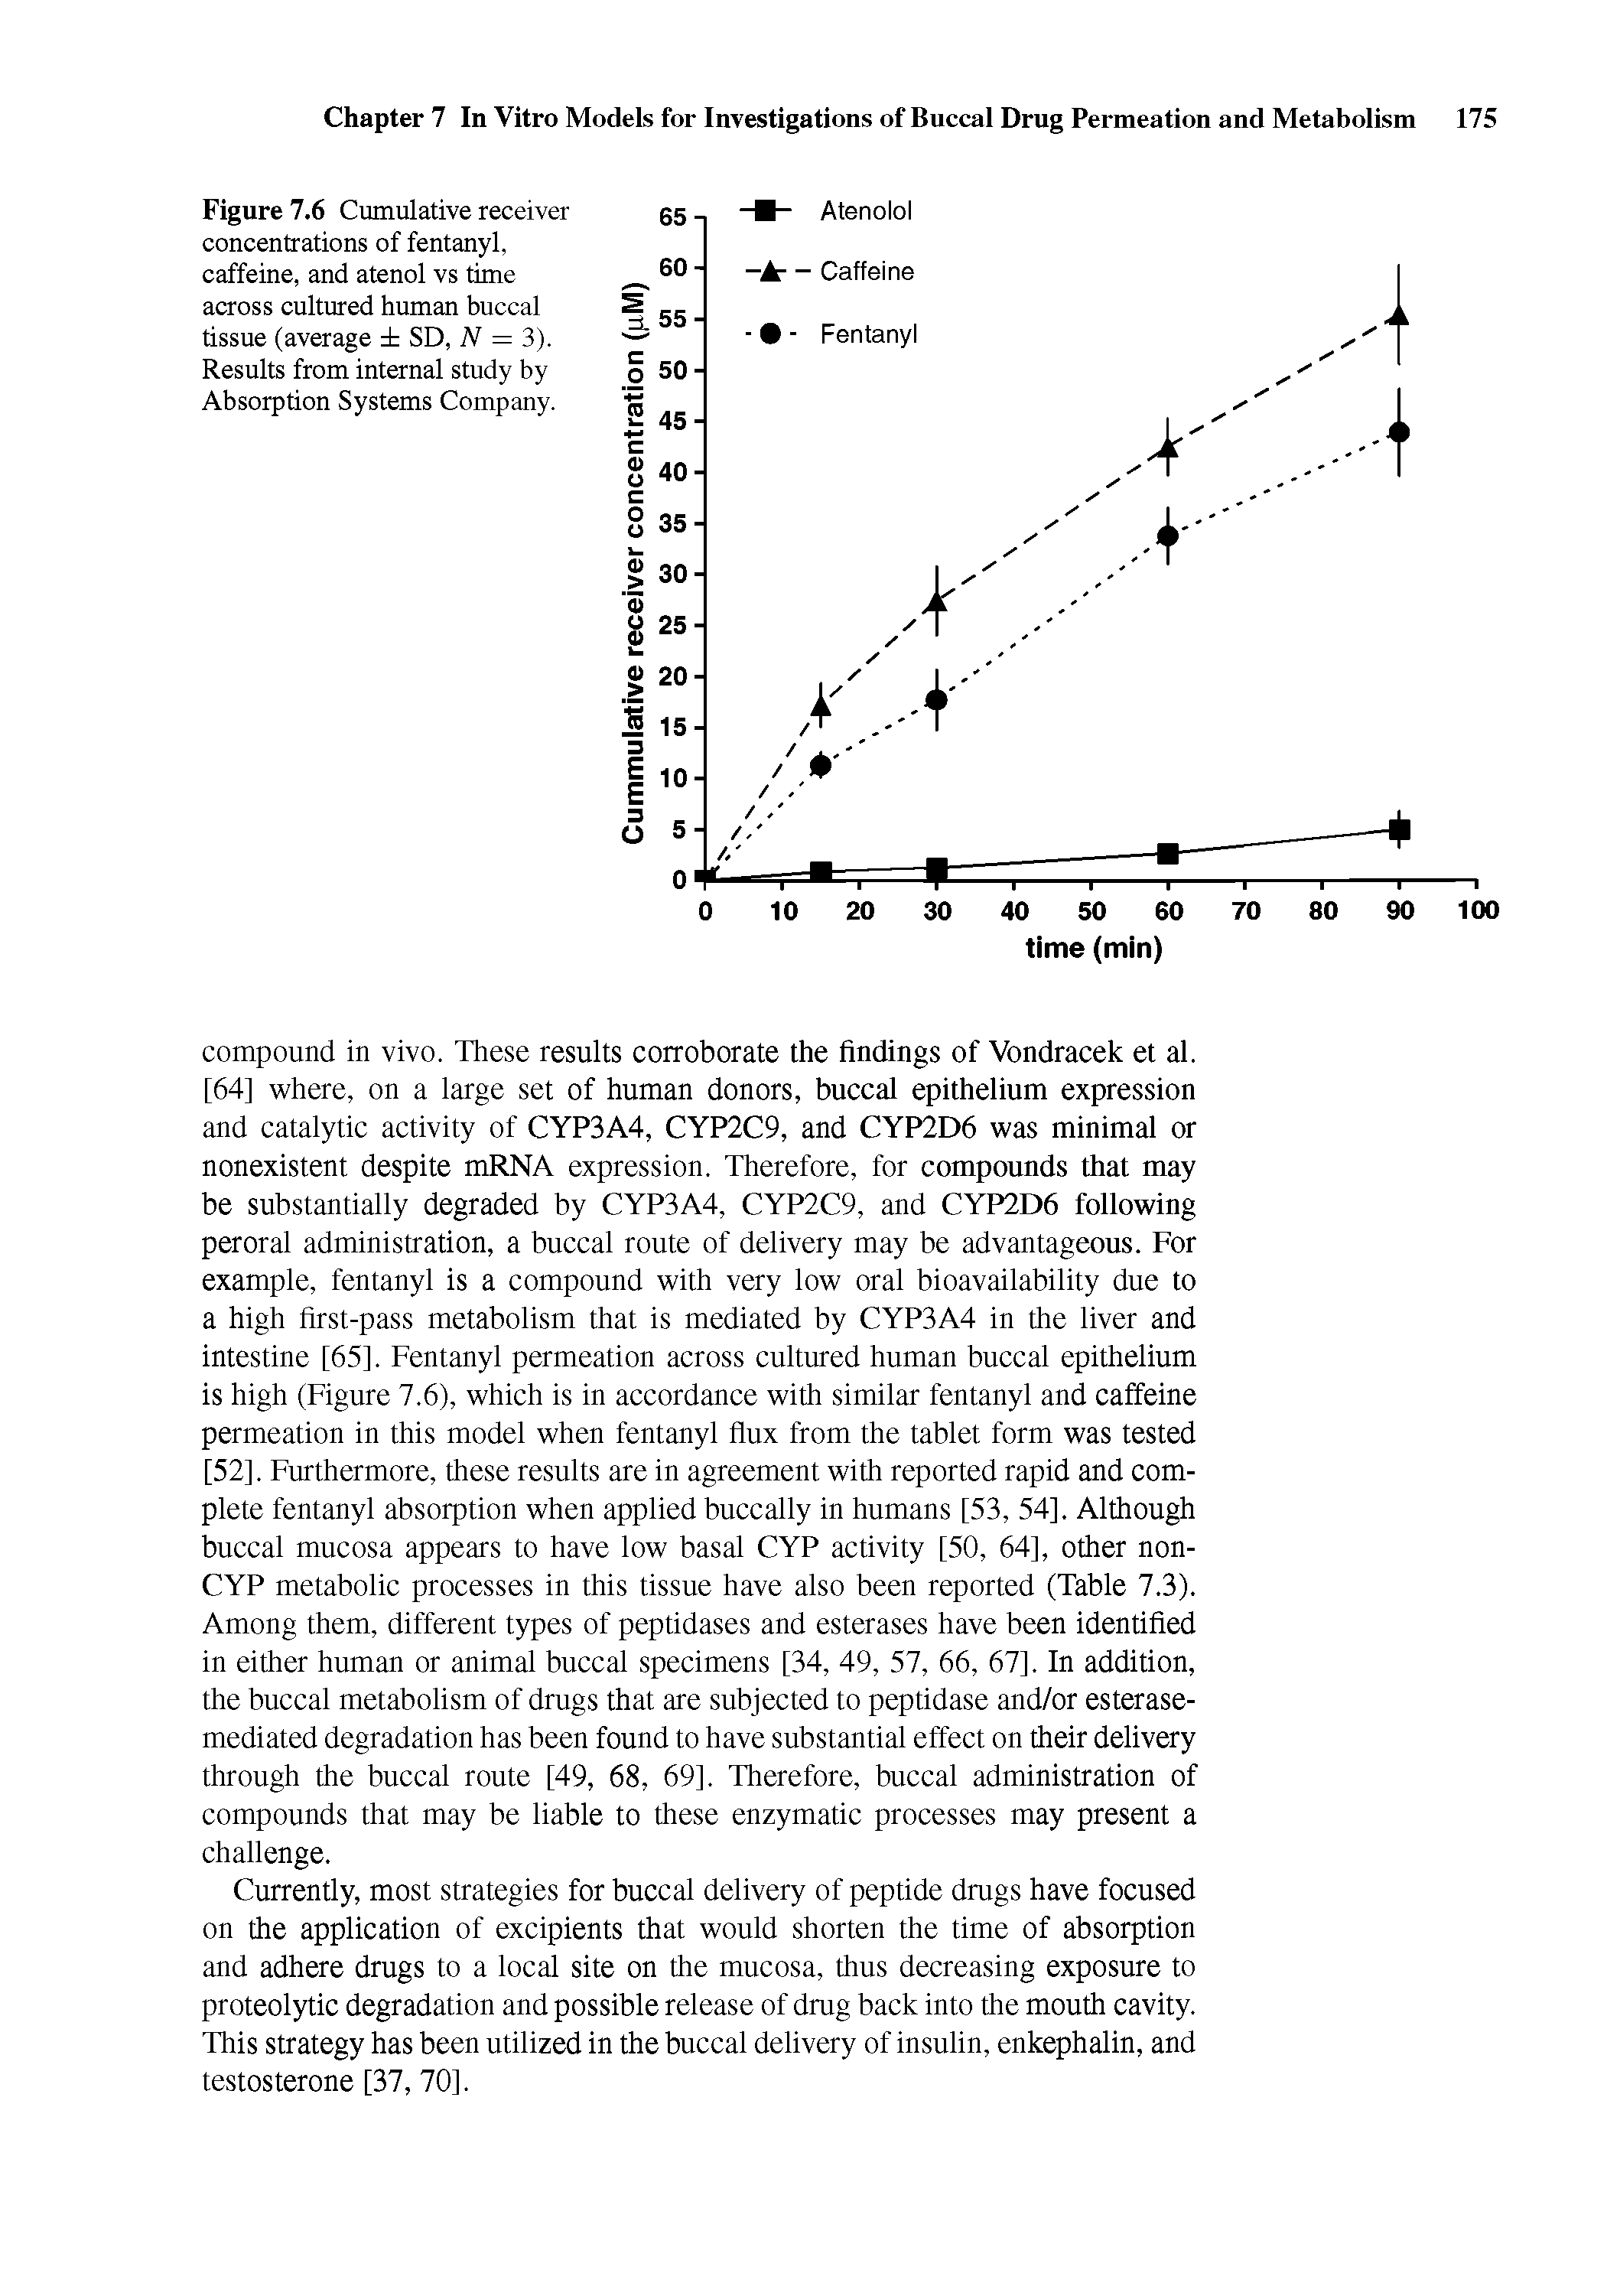 Figure 7.6 Cumulative receiver concentrations of fentanyl, caffeine, and atenol vs time across cultured human buccal tissue (average SD, N = 3). Results from internal study by Absorption Systems Company.